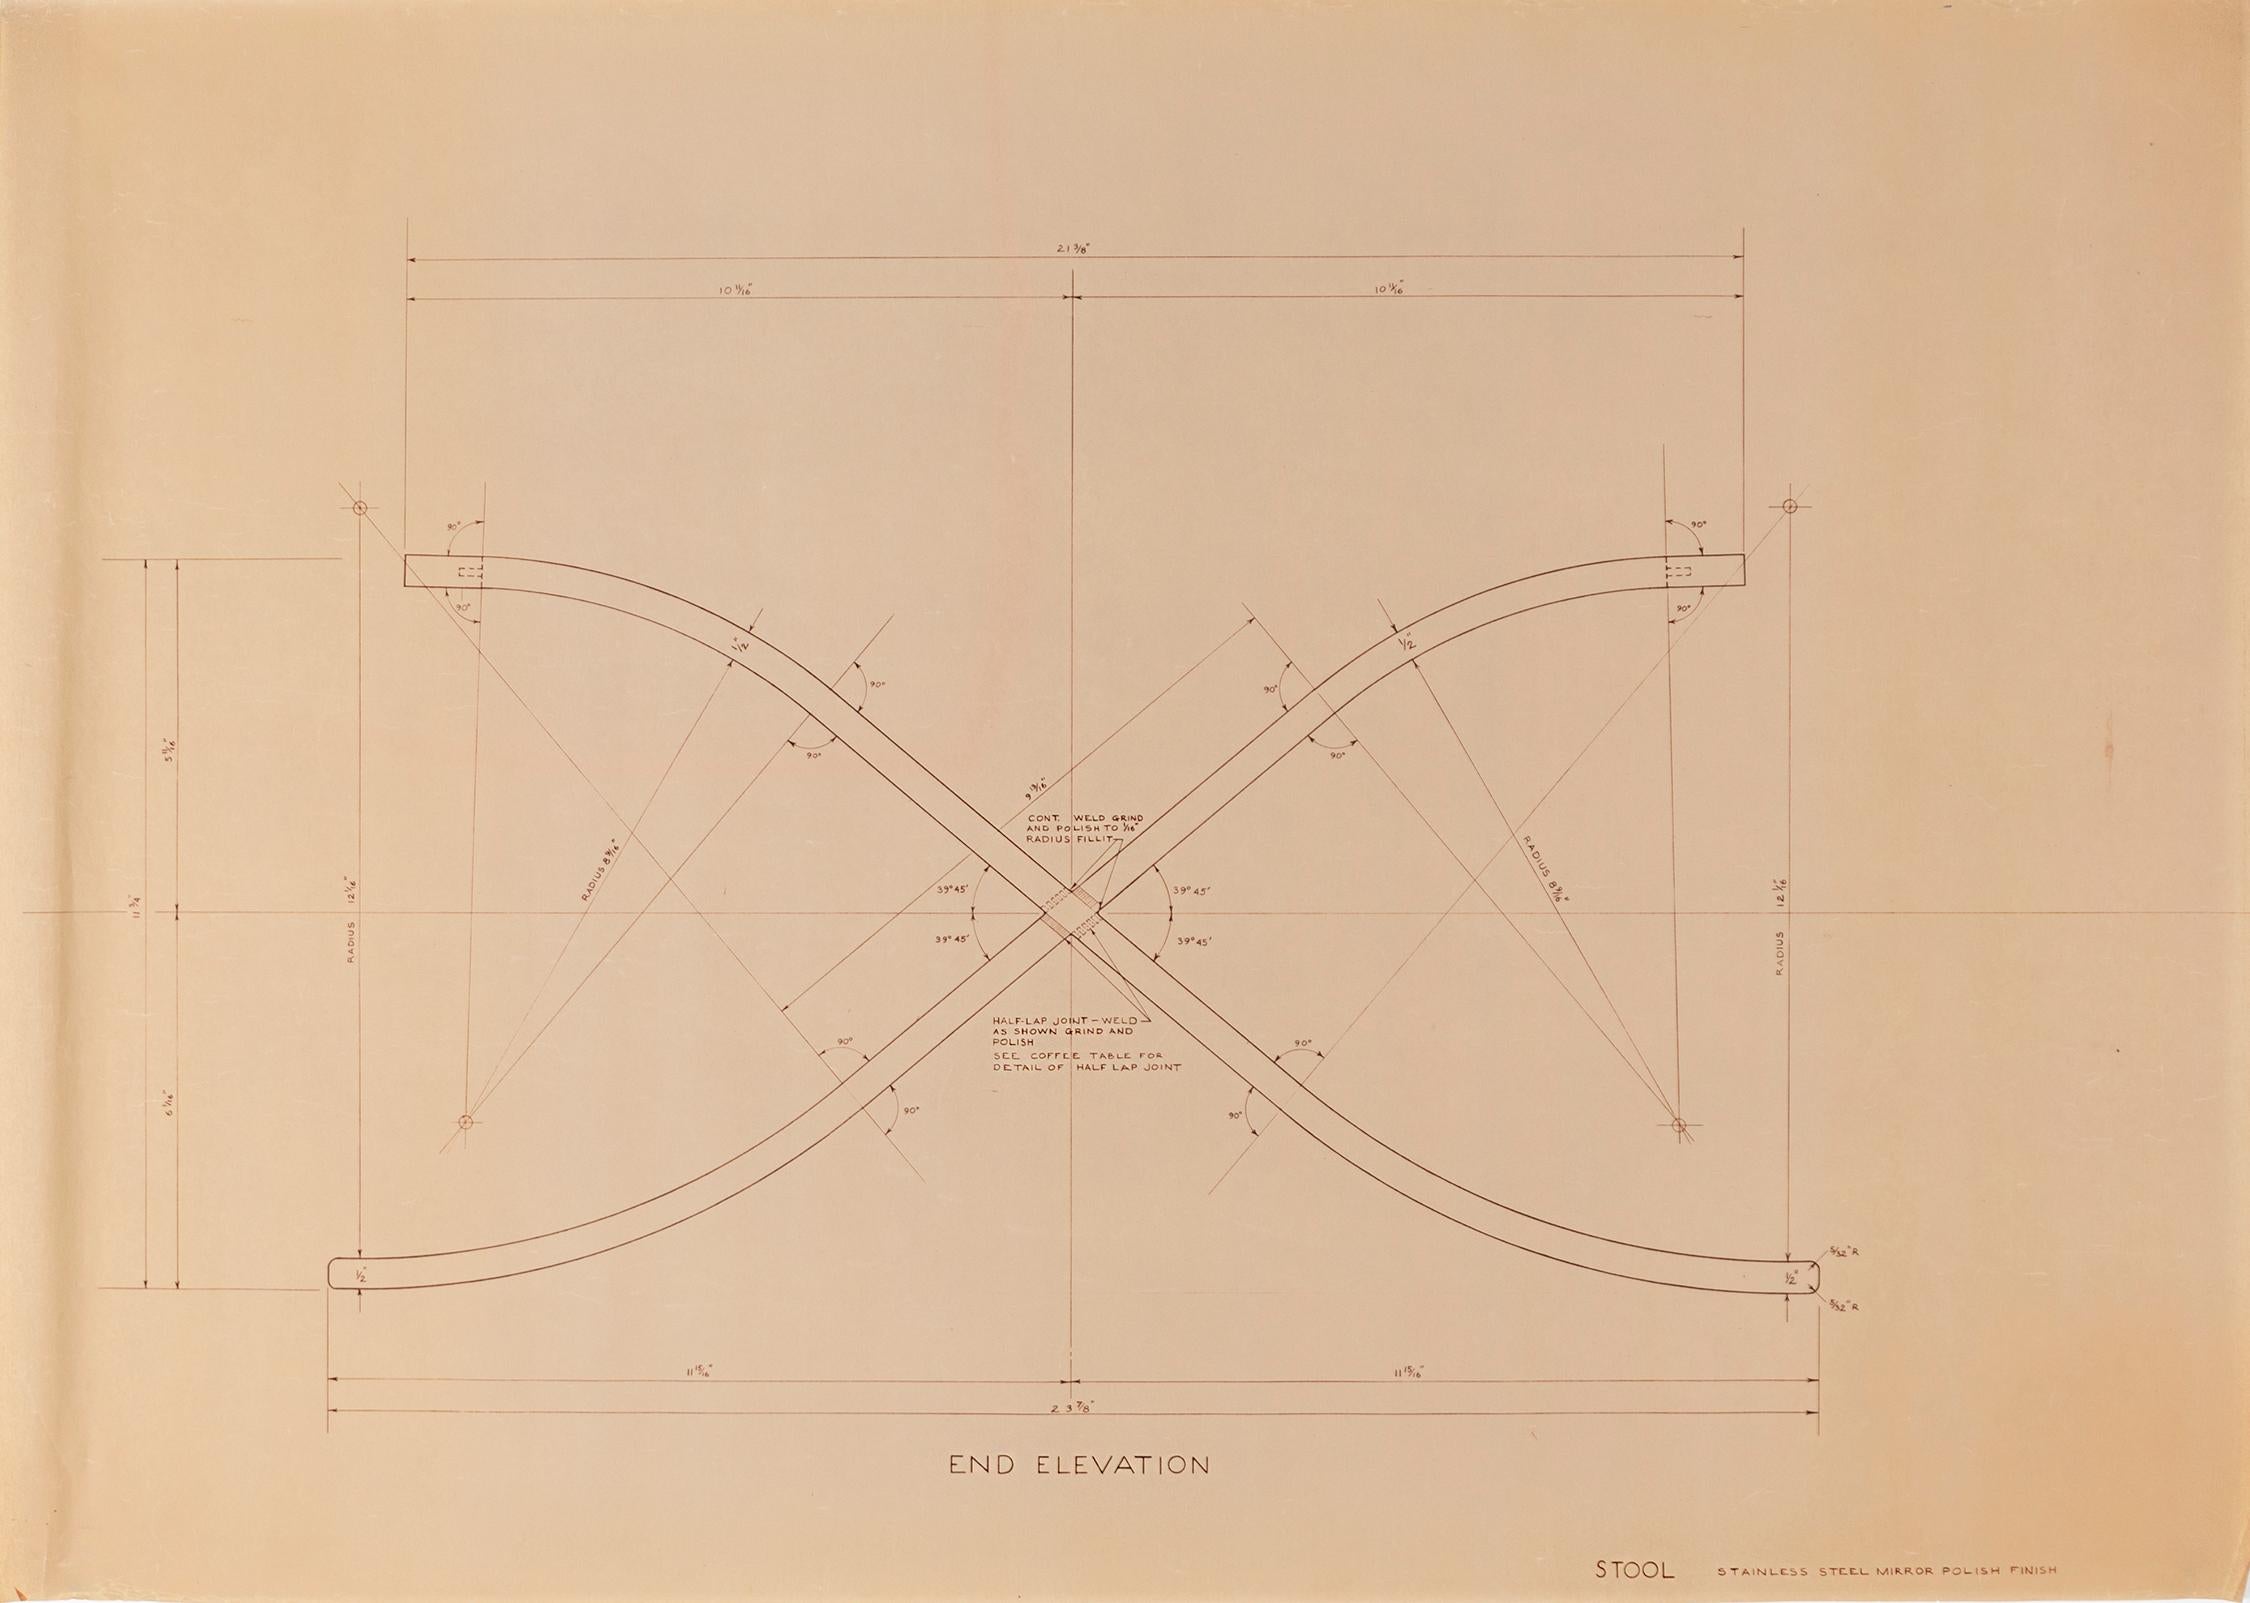 Pair of stool design drawings

The office of Mies van der Rohe

Designed by Ludwig Mies van der Rohe in 1929 for the German Pavilion, Barcelona, Spain

Unknown delineator, Office of Mies van der Rohe

Sepia print

Measures: 26” H x 36” W,